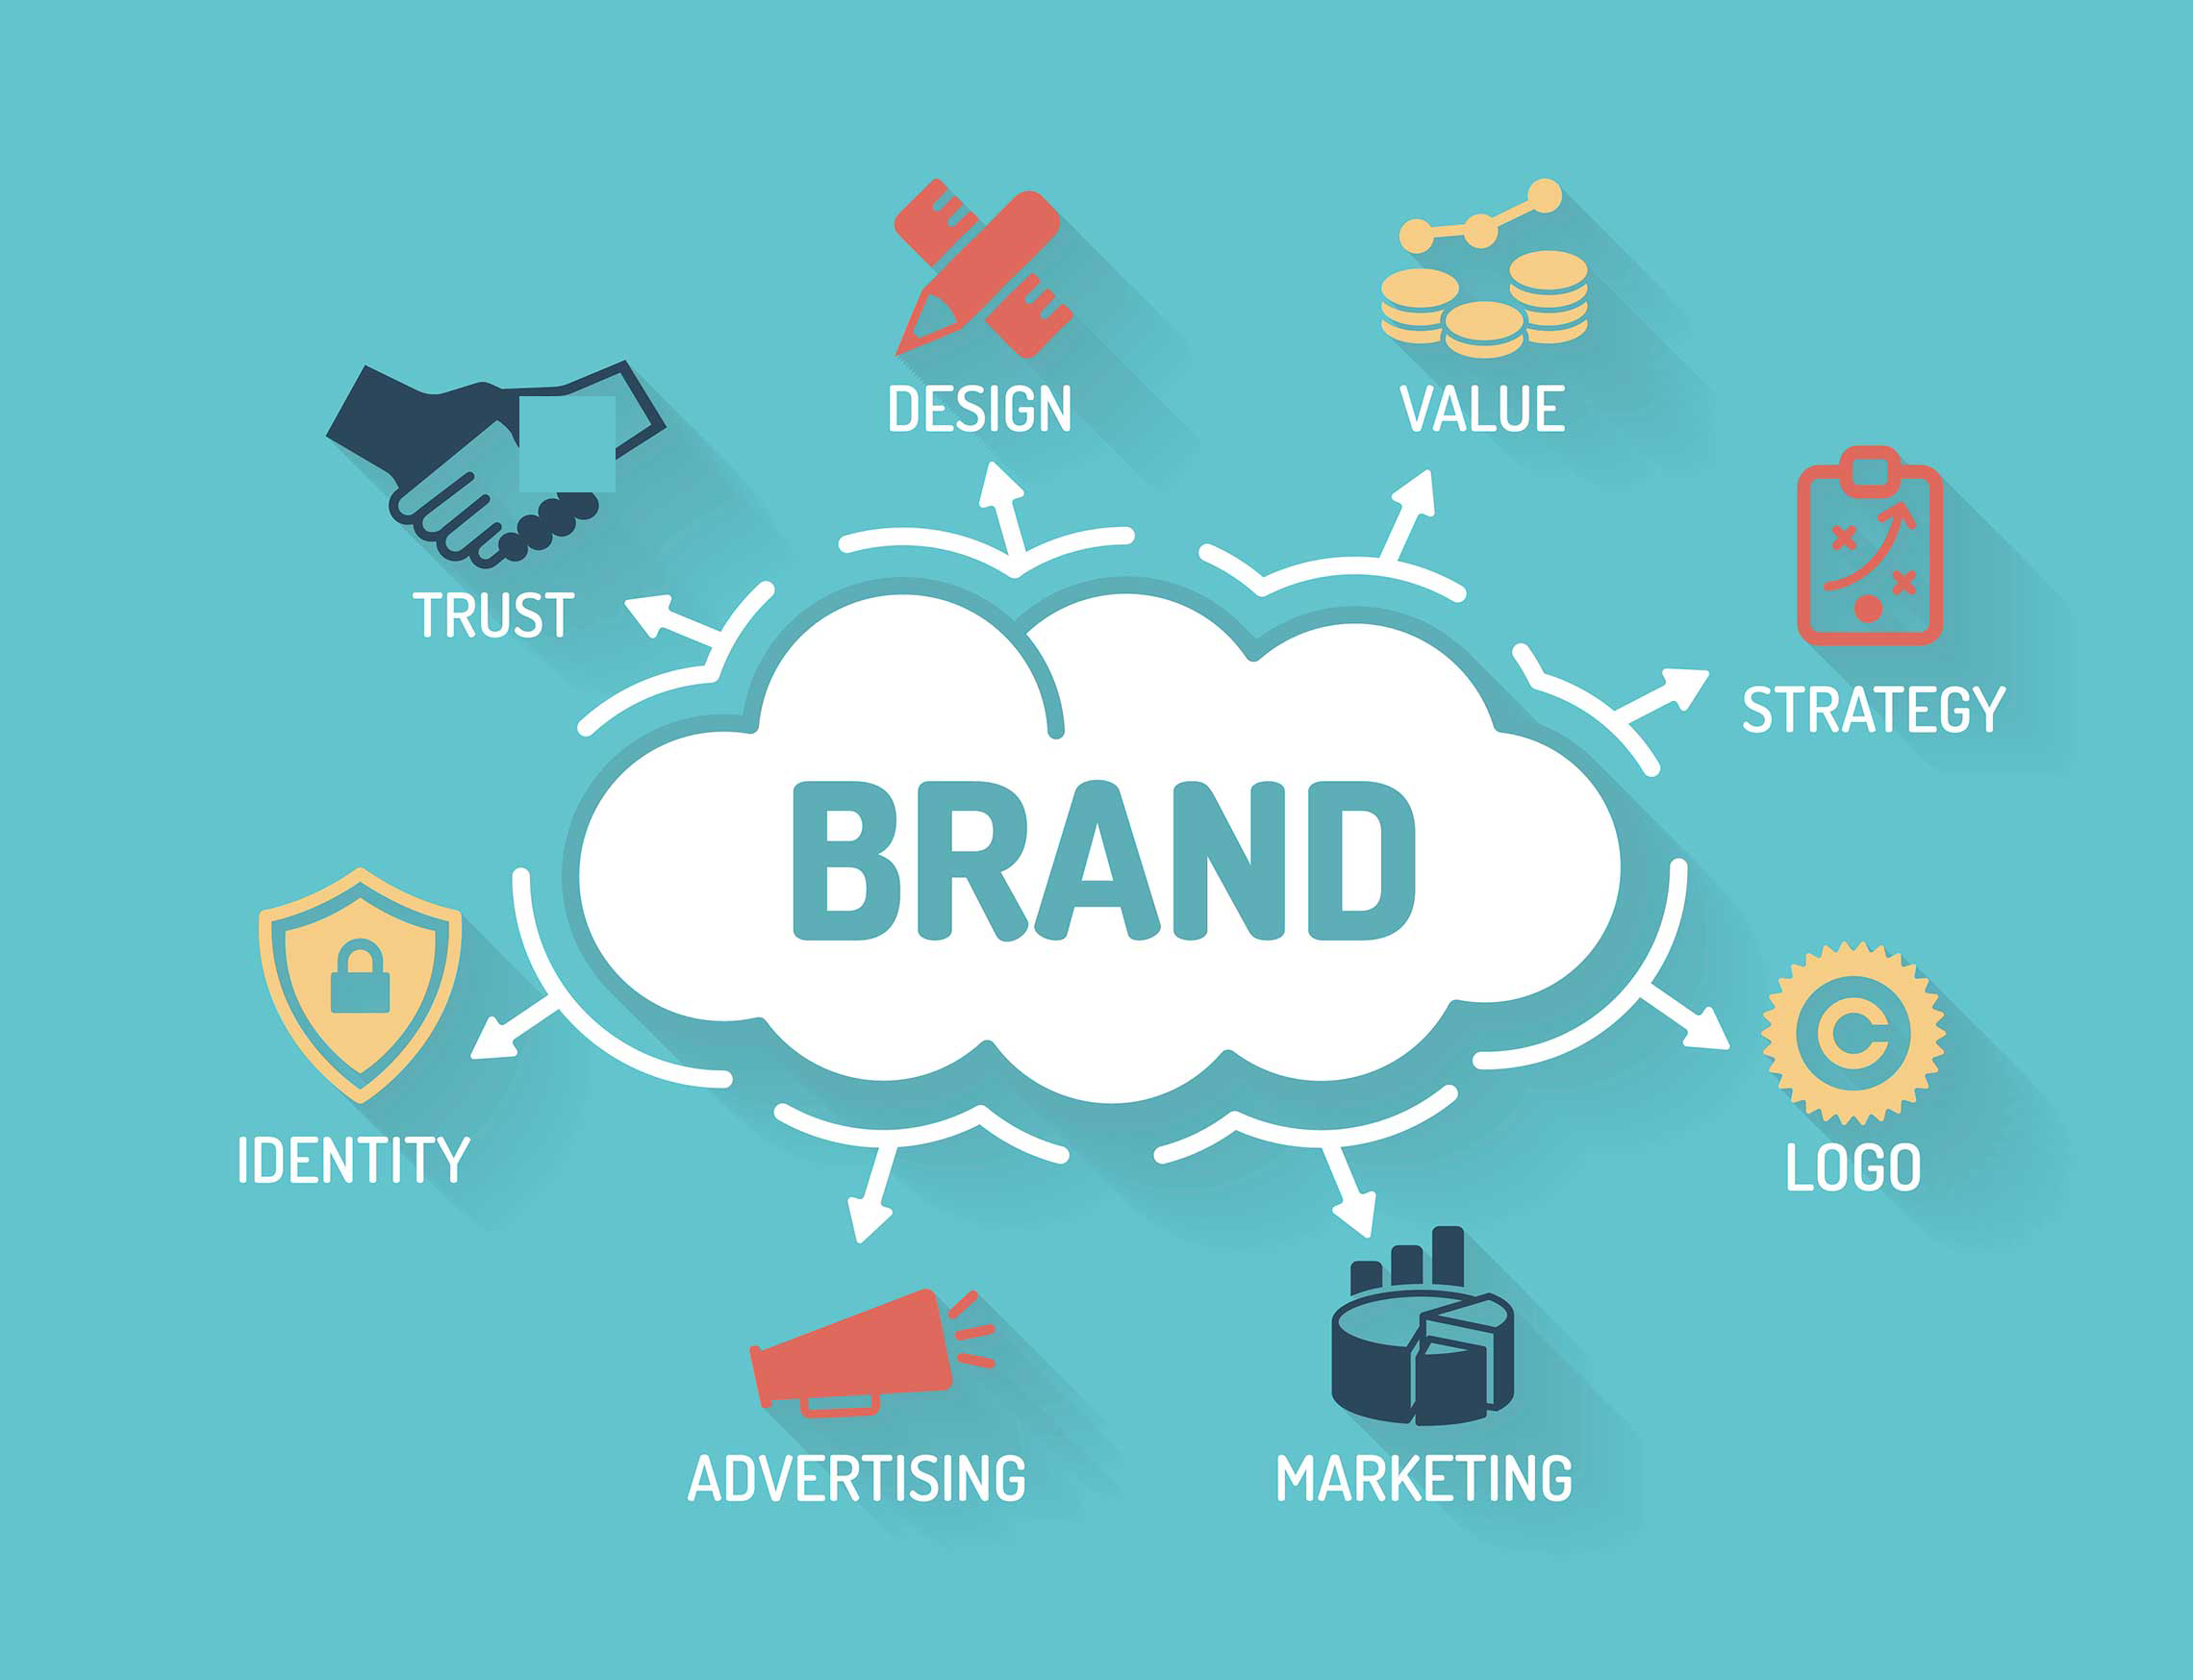 Best Branding Promotion Company in Chennai | Branding Services in Chennai | Top Branding Companies in Chennai | Branding Advertising Agency in Chennai | Branding Agency in Chennai | Creative Ad Agency